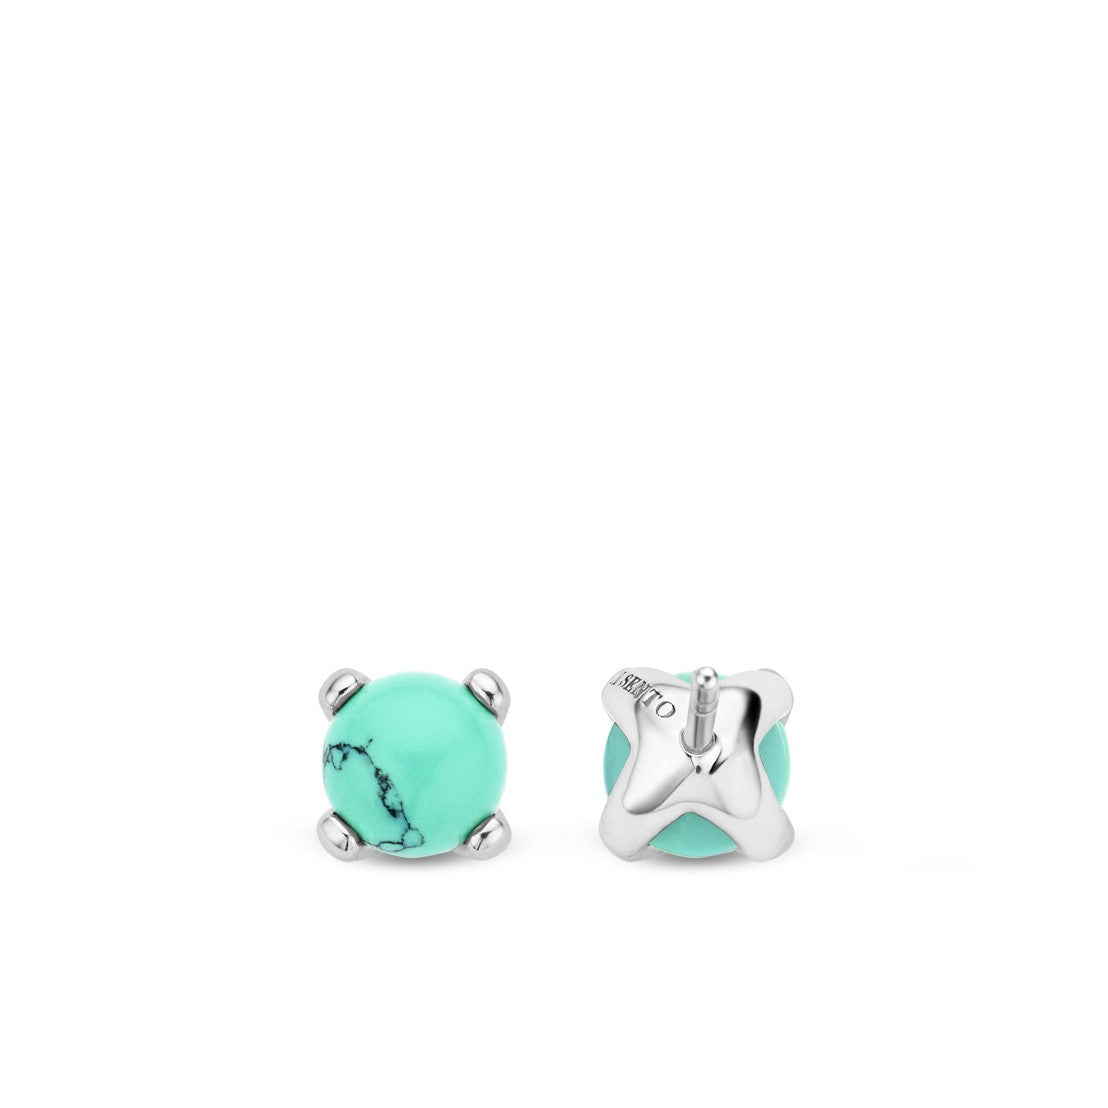 TI SENTO Sterling Silver Turquoise Colored Stud Earrings